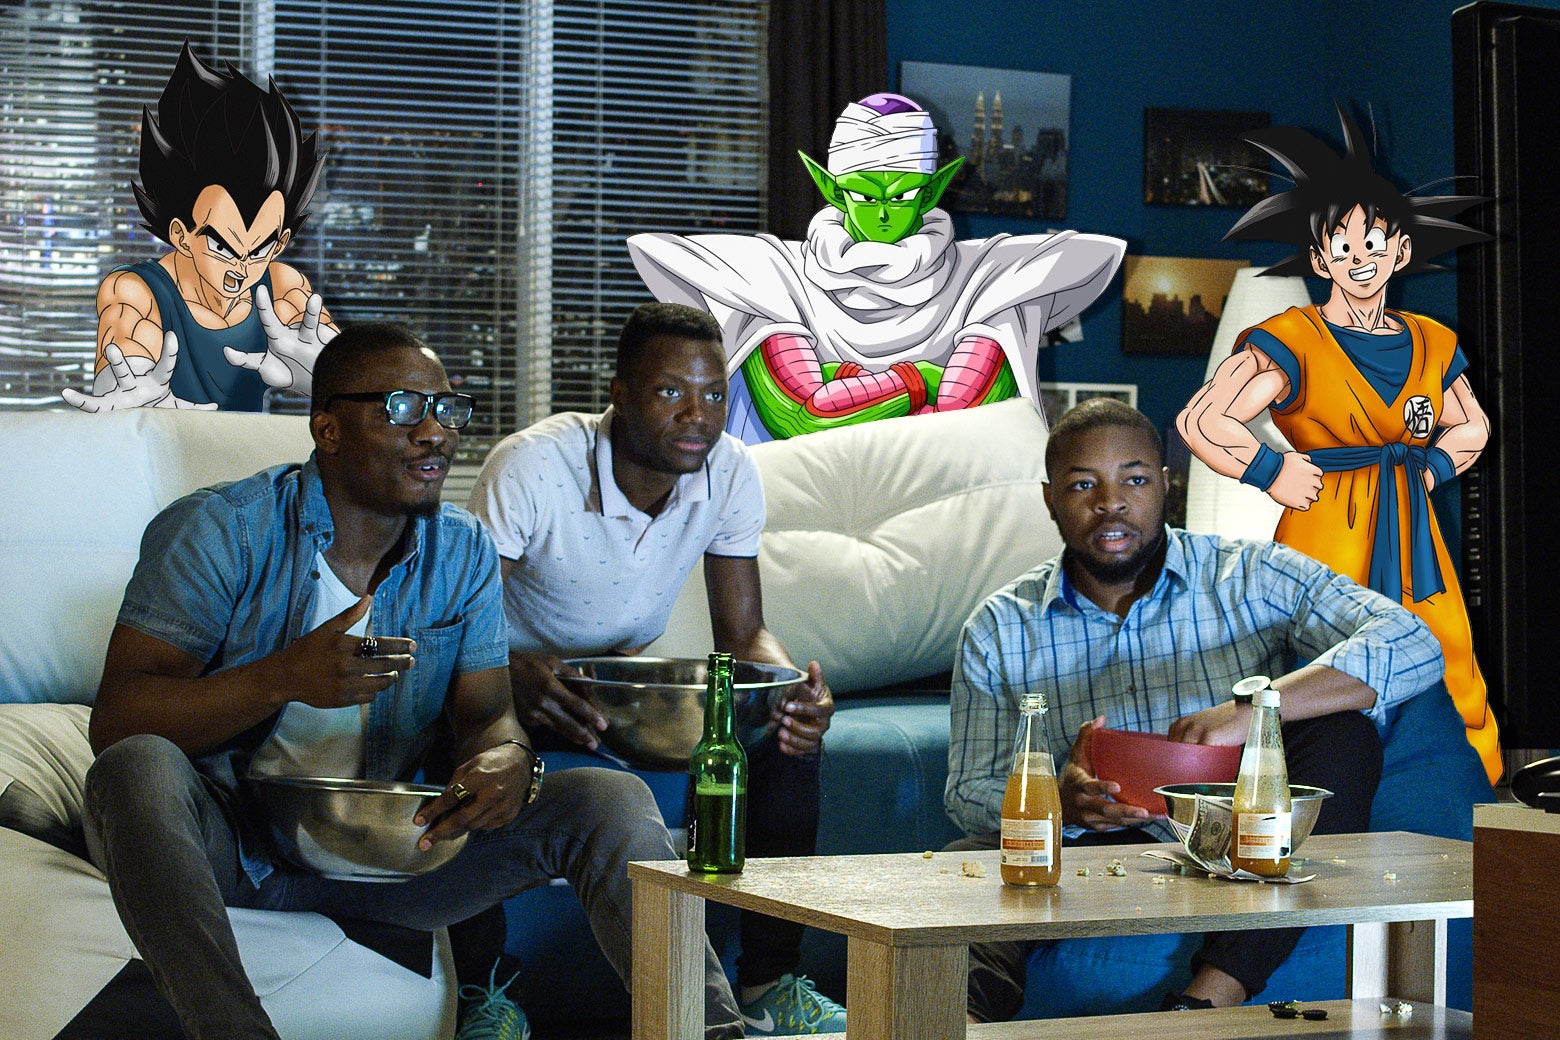 A group of young Black men sits watching TV and eating popcorn; in the room with them are several illustrated life-size characters from Dragon Ball.